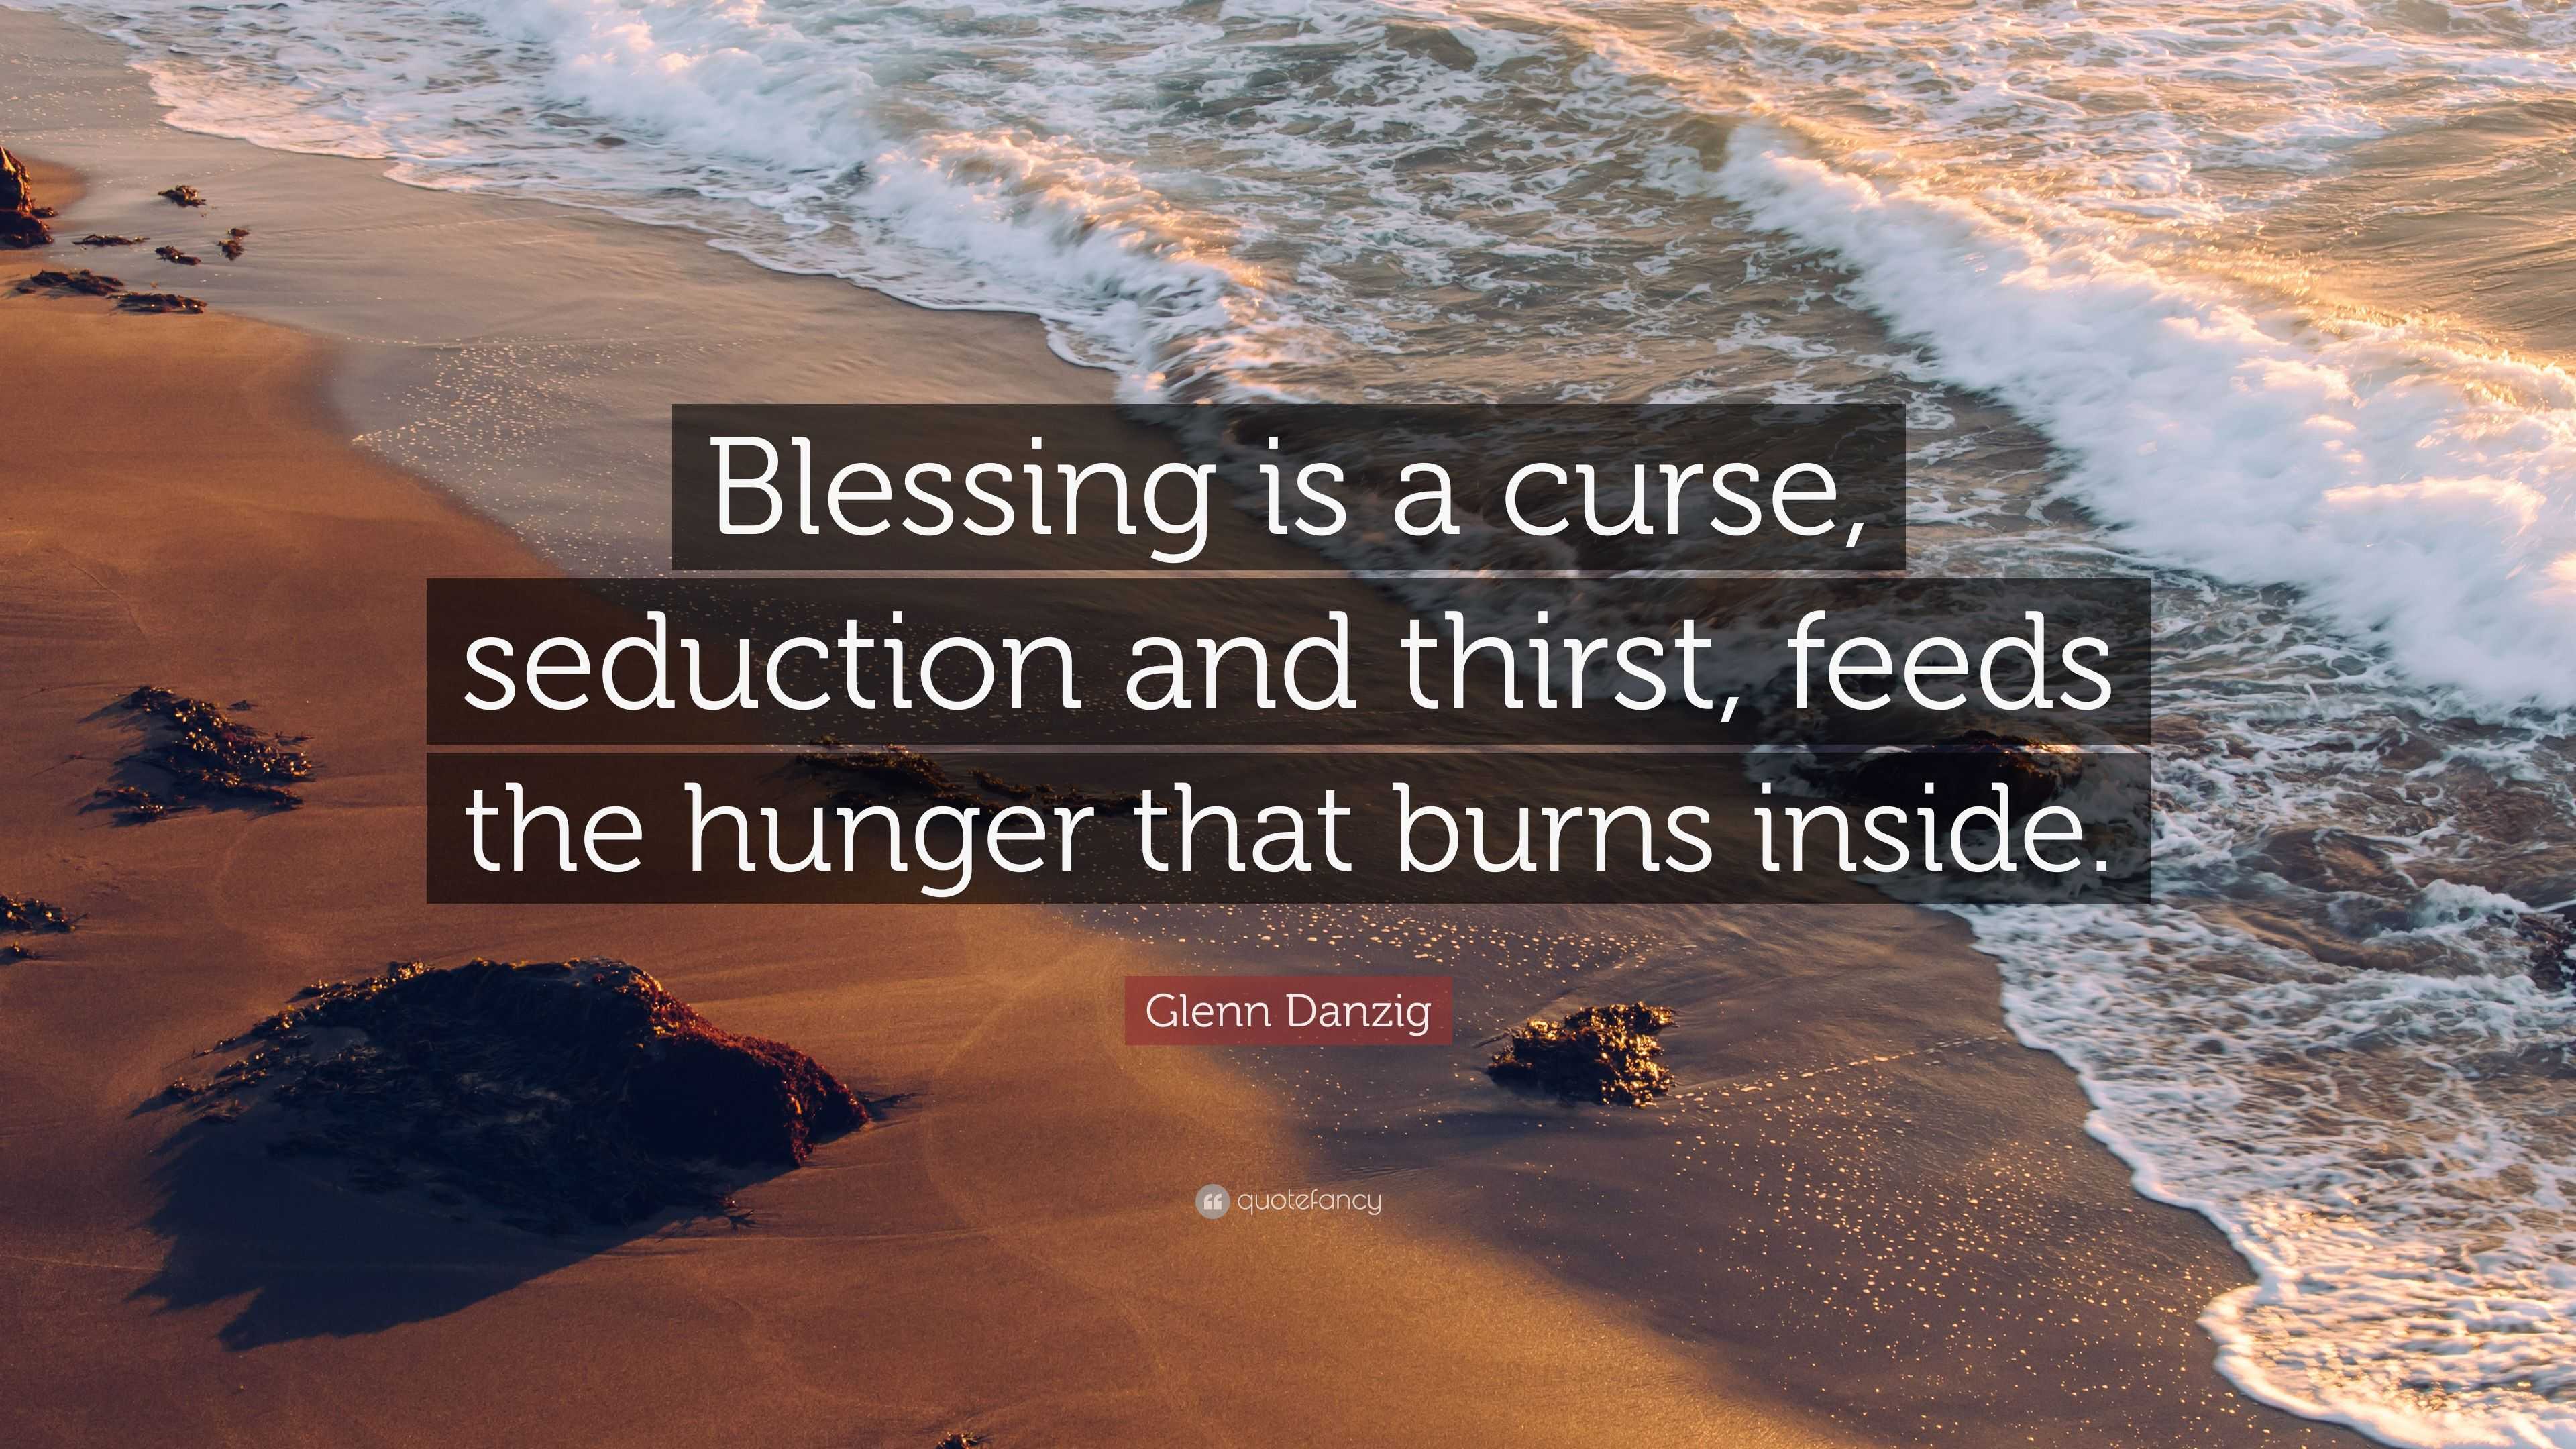 Glenn Danzig Quote: “Blessing is a curse, seduction and thirst